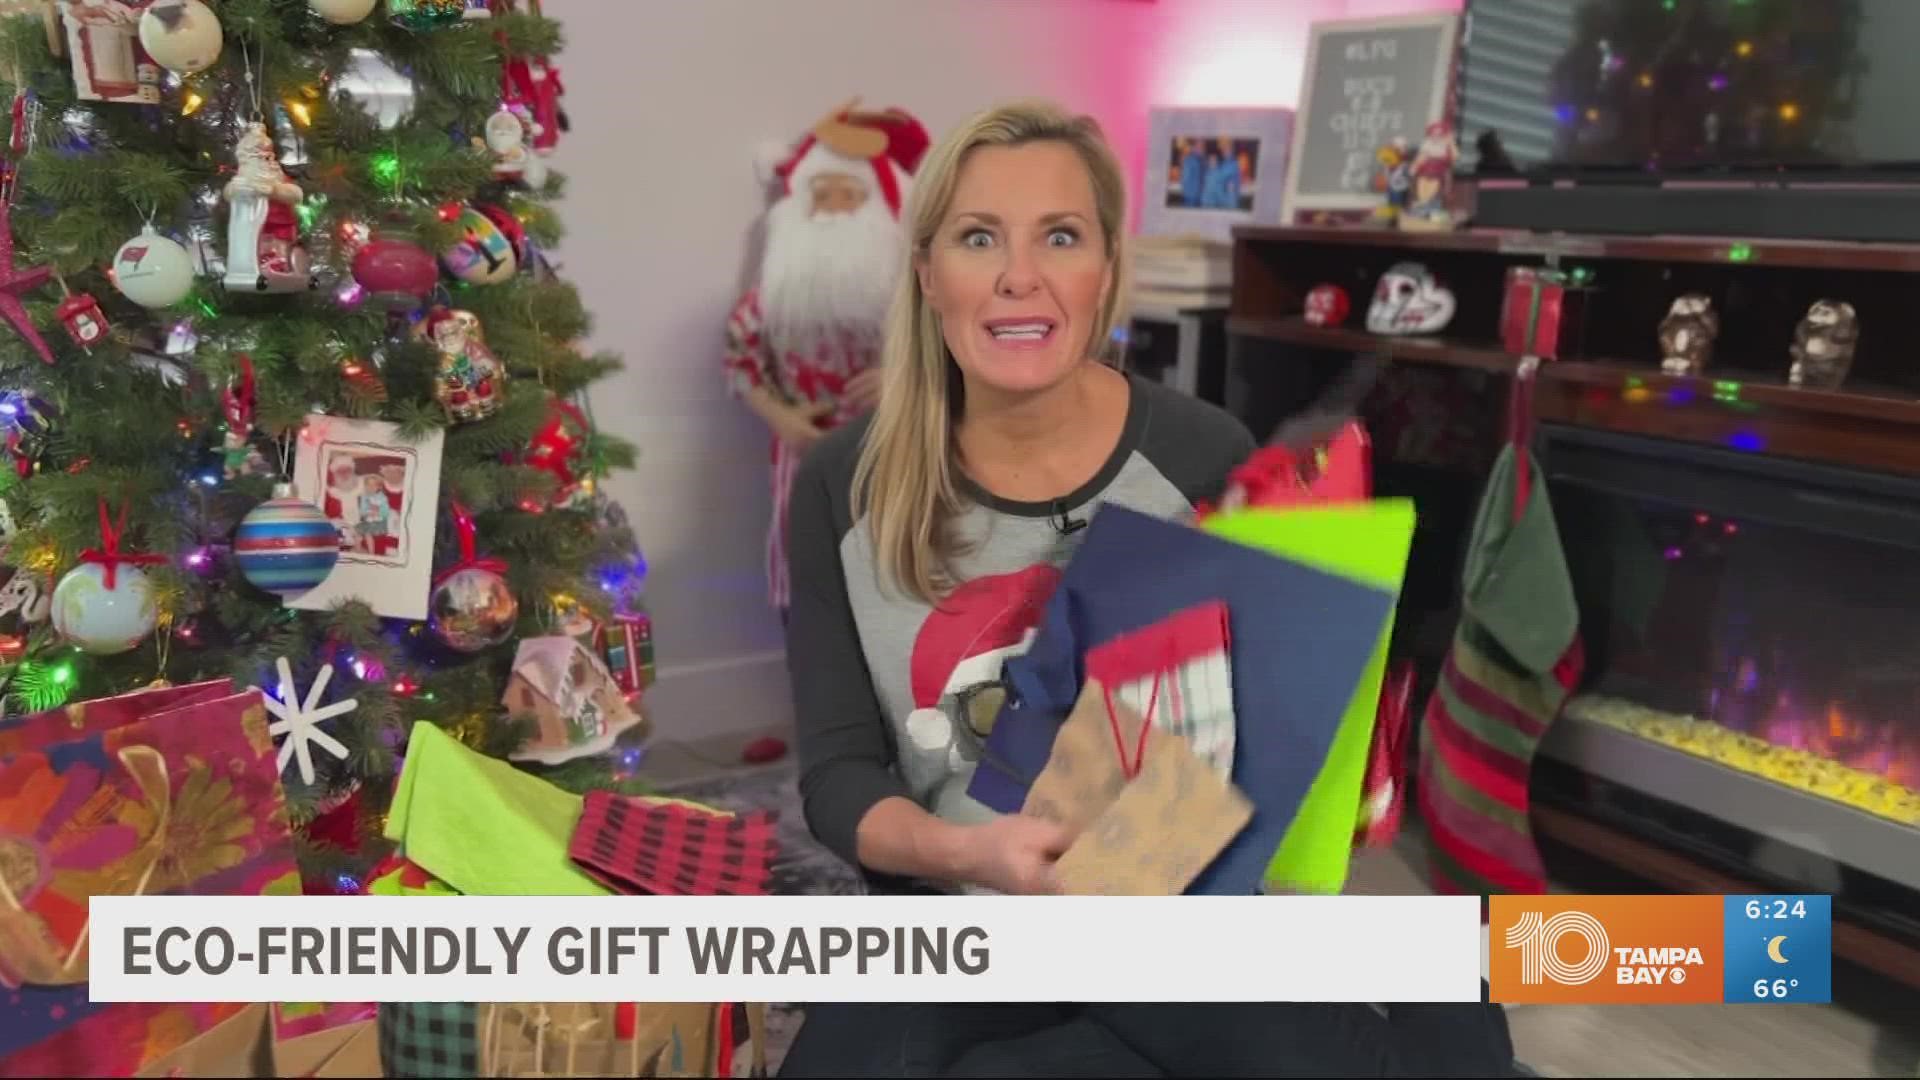 One key element to eco-friendly gift wrapping is making sure your wrapping paper isn't waxy, glittery or shiny. But, you can still make your gifts festive!